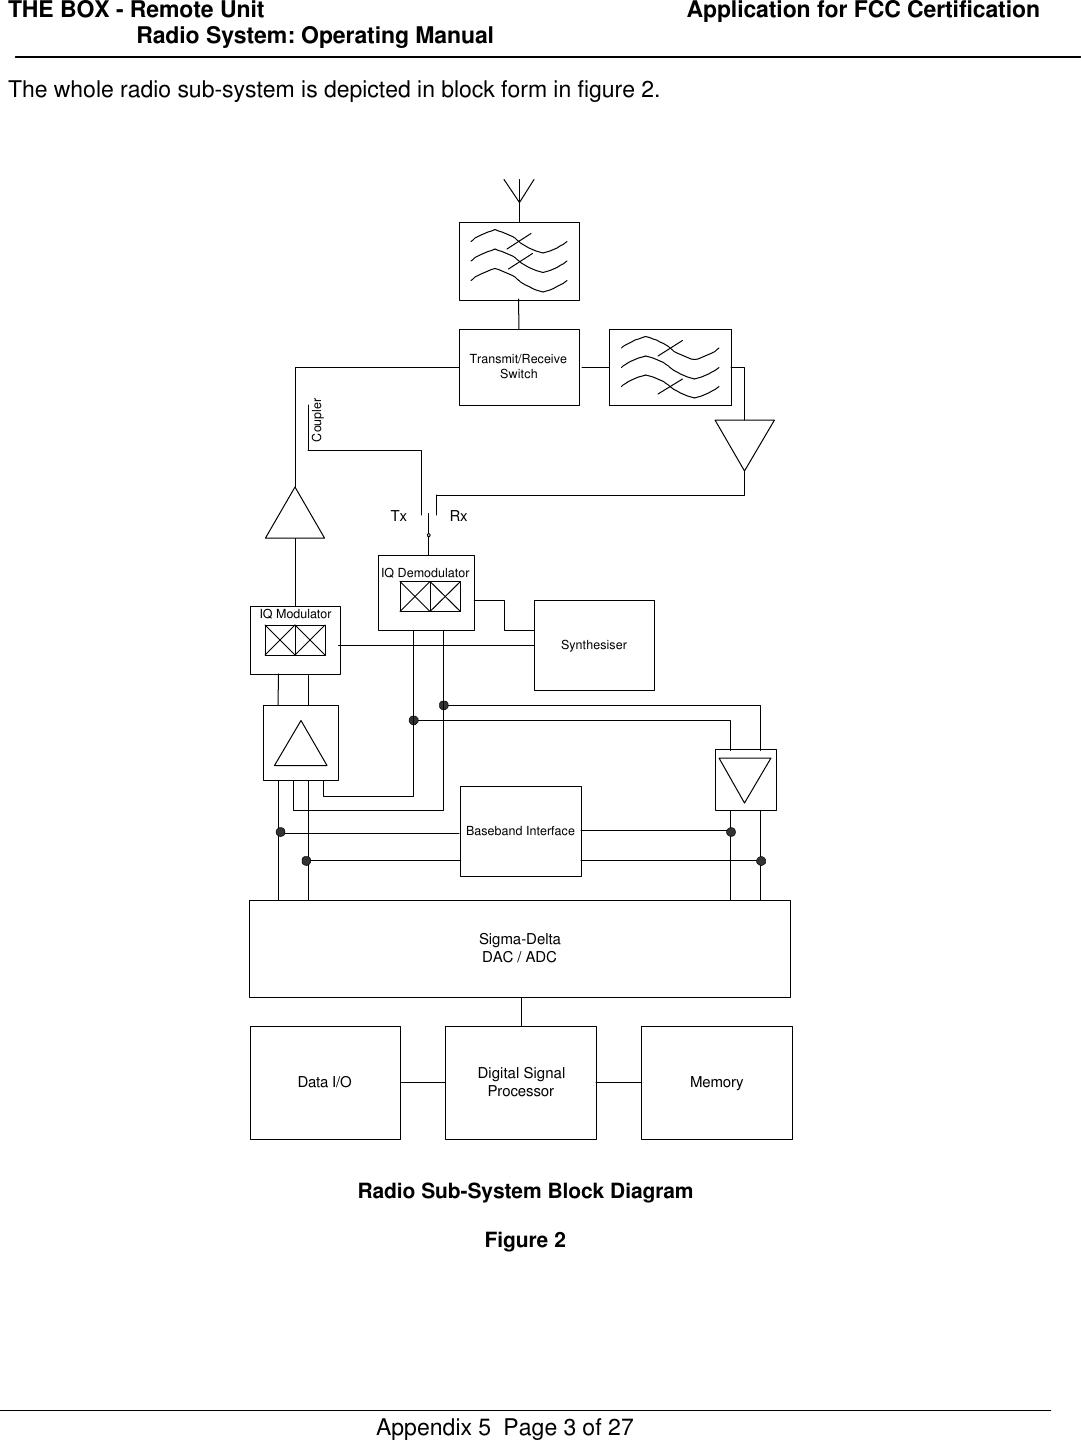 THE BOX - Remote Unit                                                                  Application for FCC Certification                    Radio System: Operating ManualAppendix 5  Page 3 of 27The whole radio sub-system is depicted in block form in figure 2.Transmit/ReceiveSwitchData I/O Digital SignalProcessor MemorySigma-DeltaDAC / ADCBaseband InterfaceSynthesiserIQ DemodulatorIQ ModulatorTx RxCouplerRadio Sub-System Block DiagramFigure 2